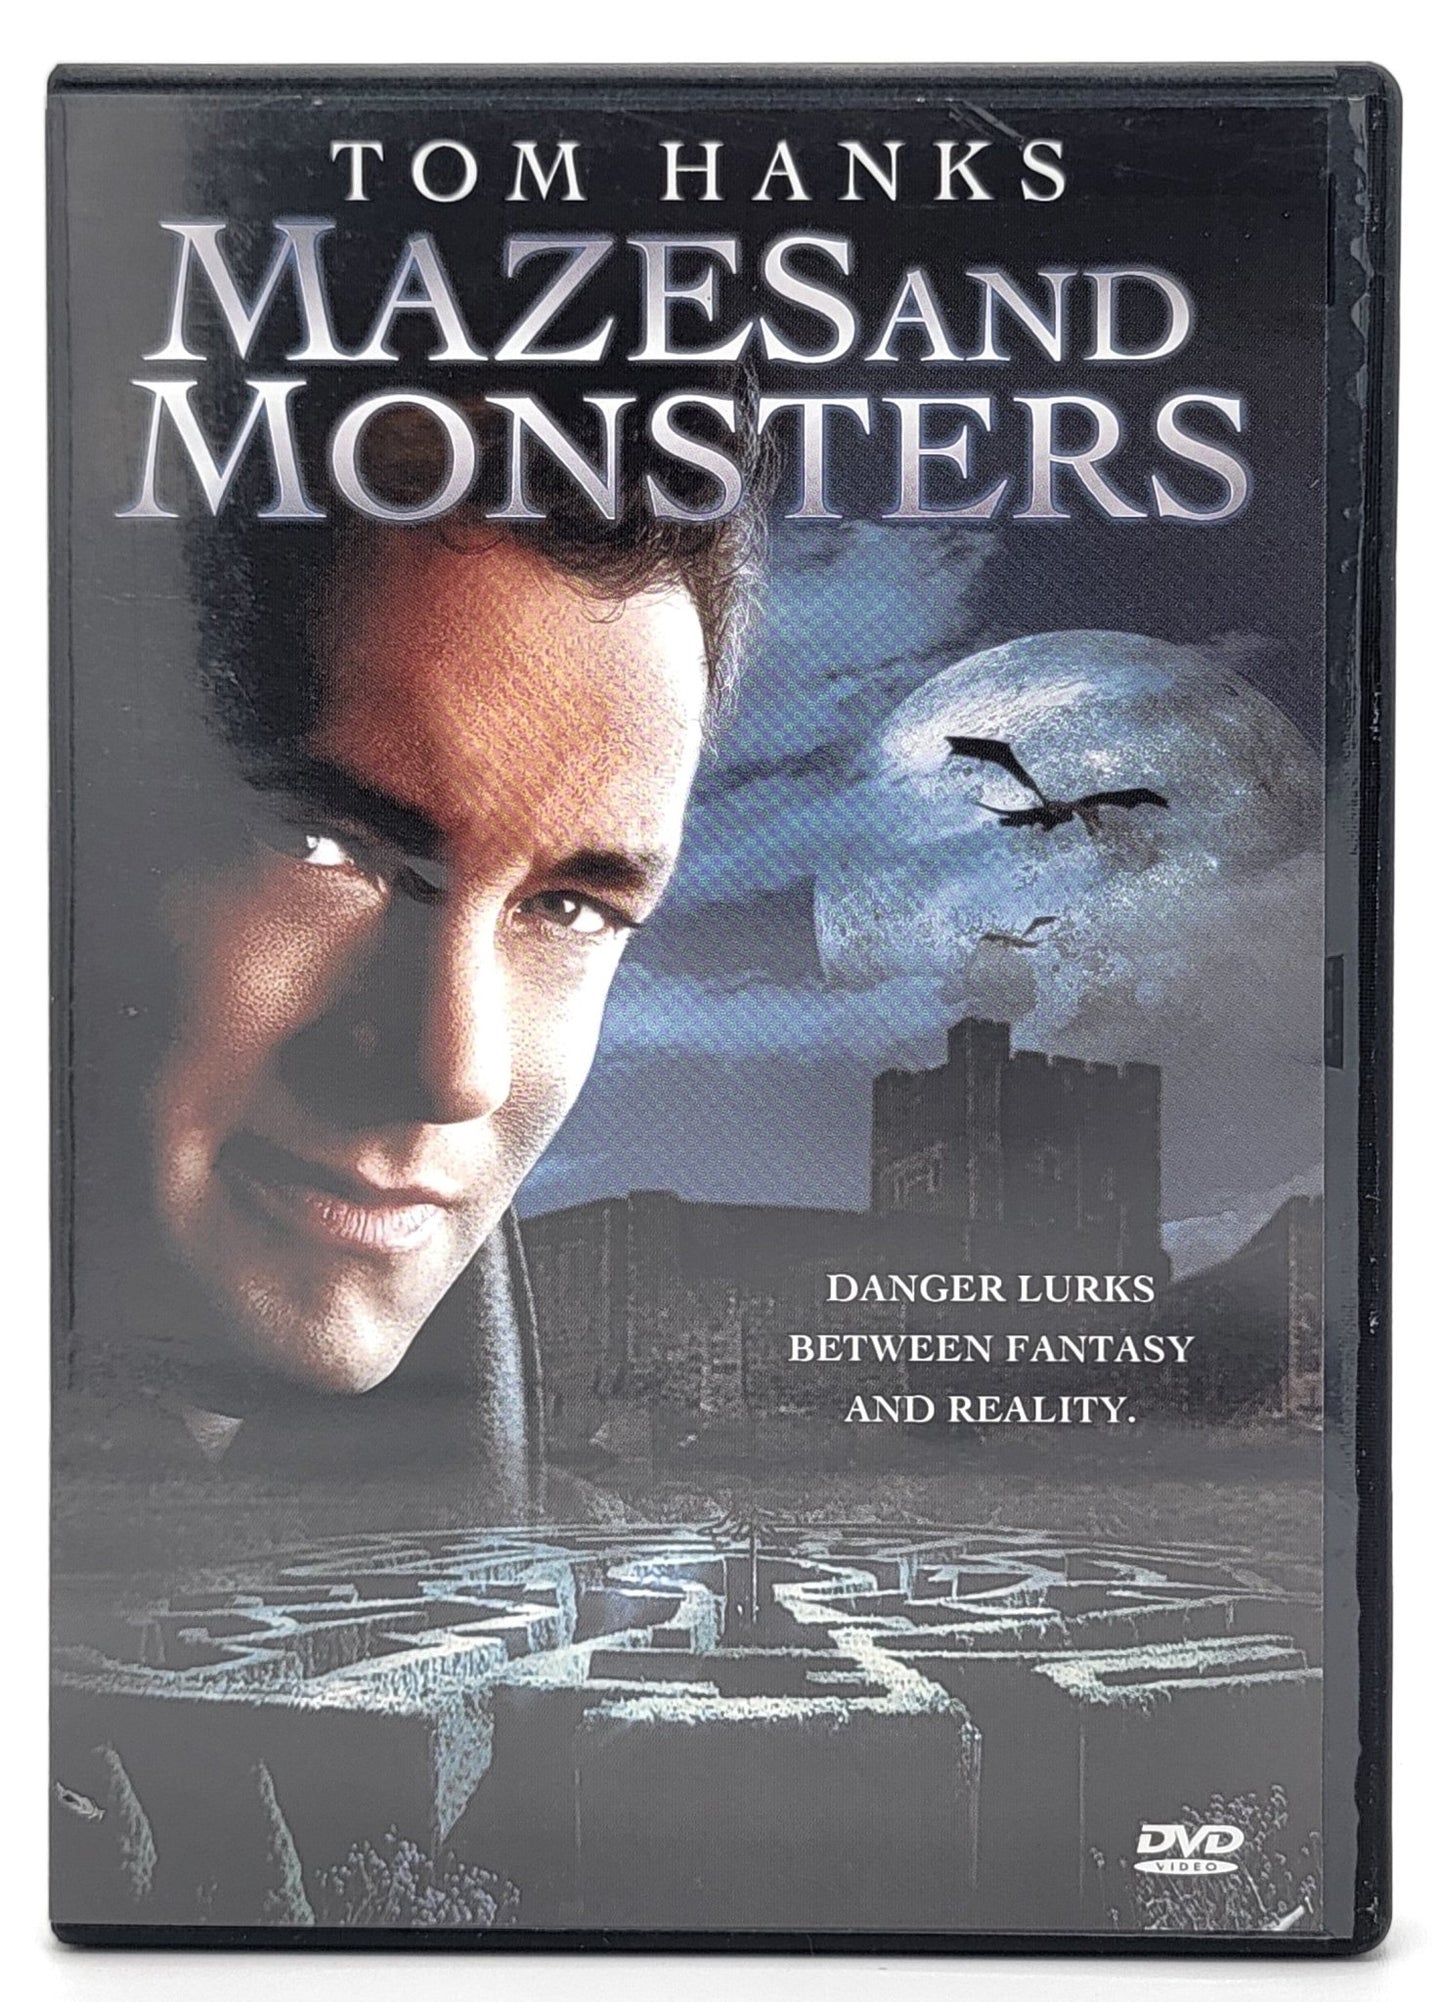 Seedsman Group - Mazes and Monsters | DVD | Fullscreen - DVD - Steady Bunny Shop